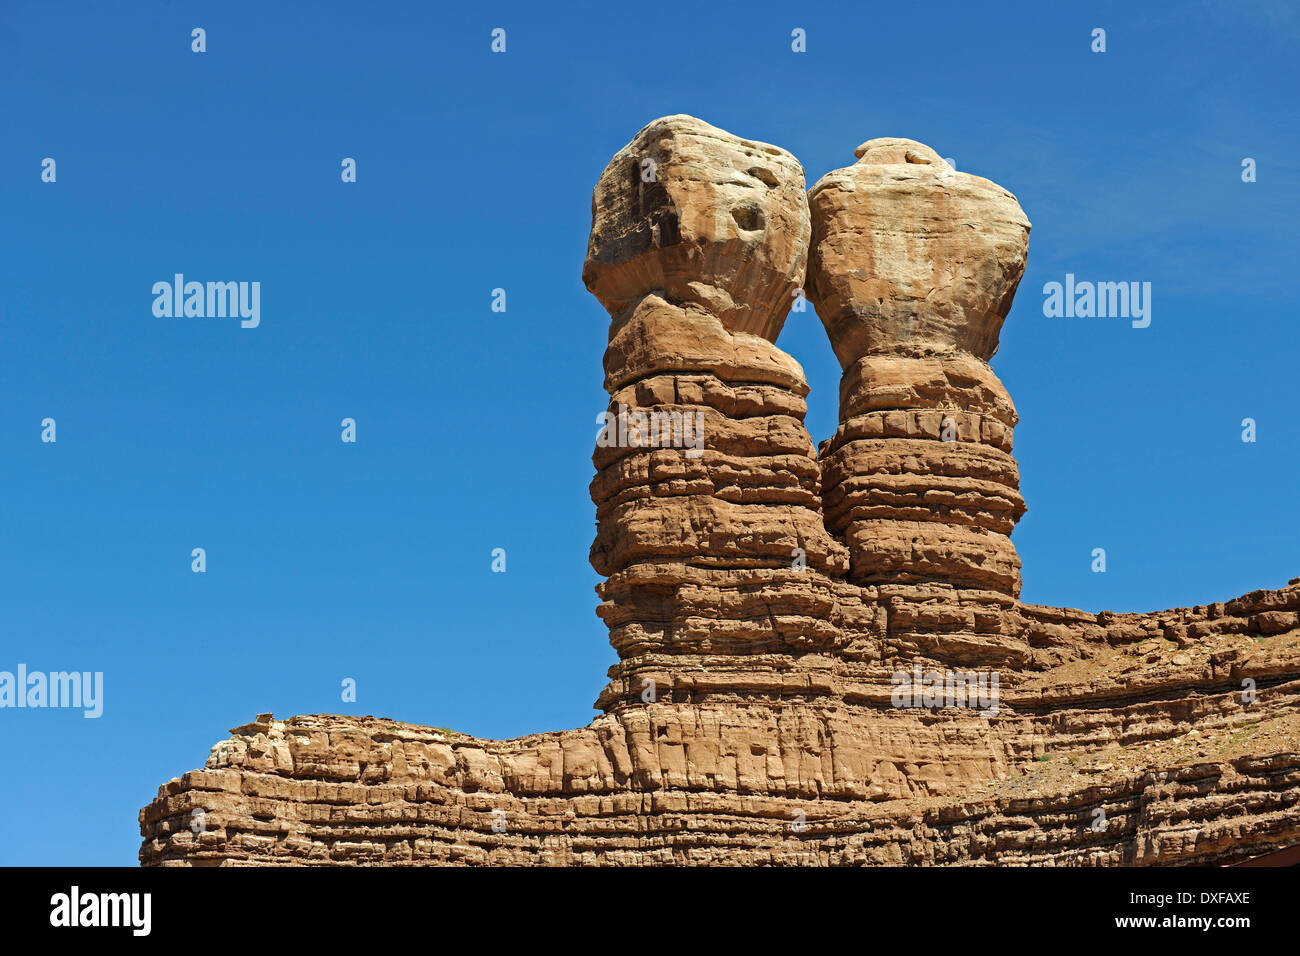 Rock formation Twin Rocks, Bluff, Utah, USA Banque D'Images